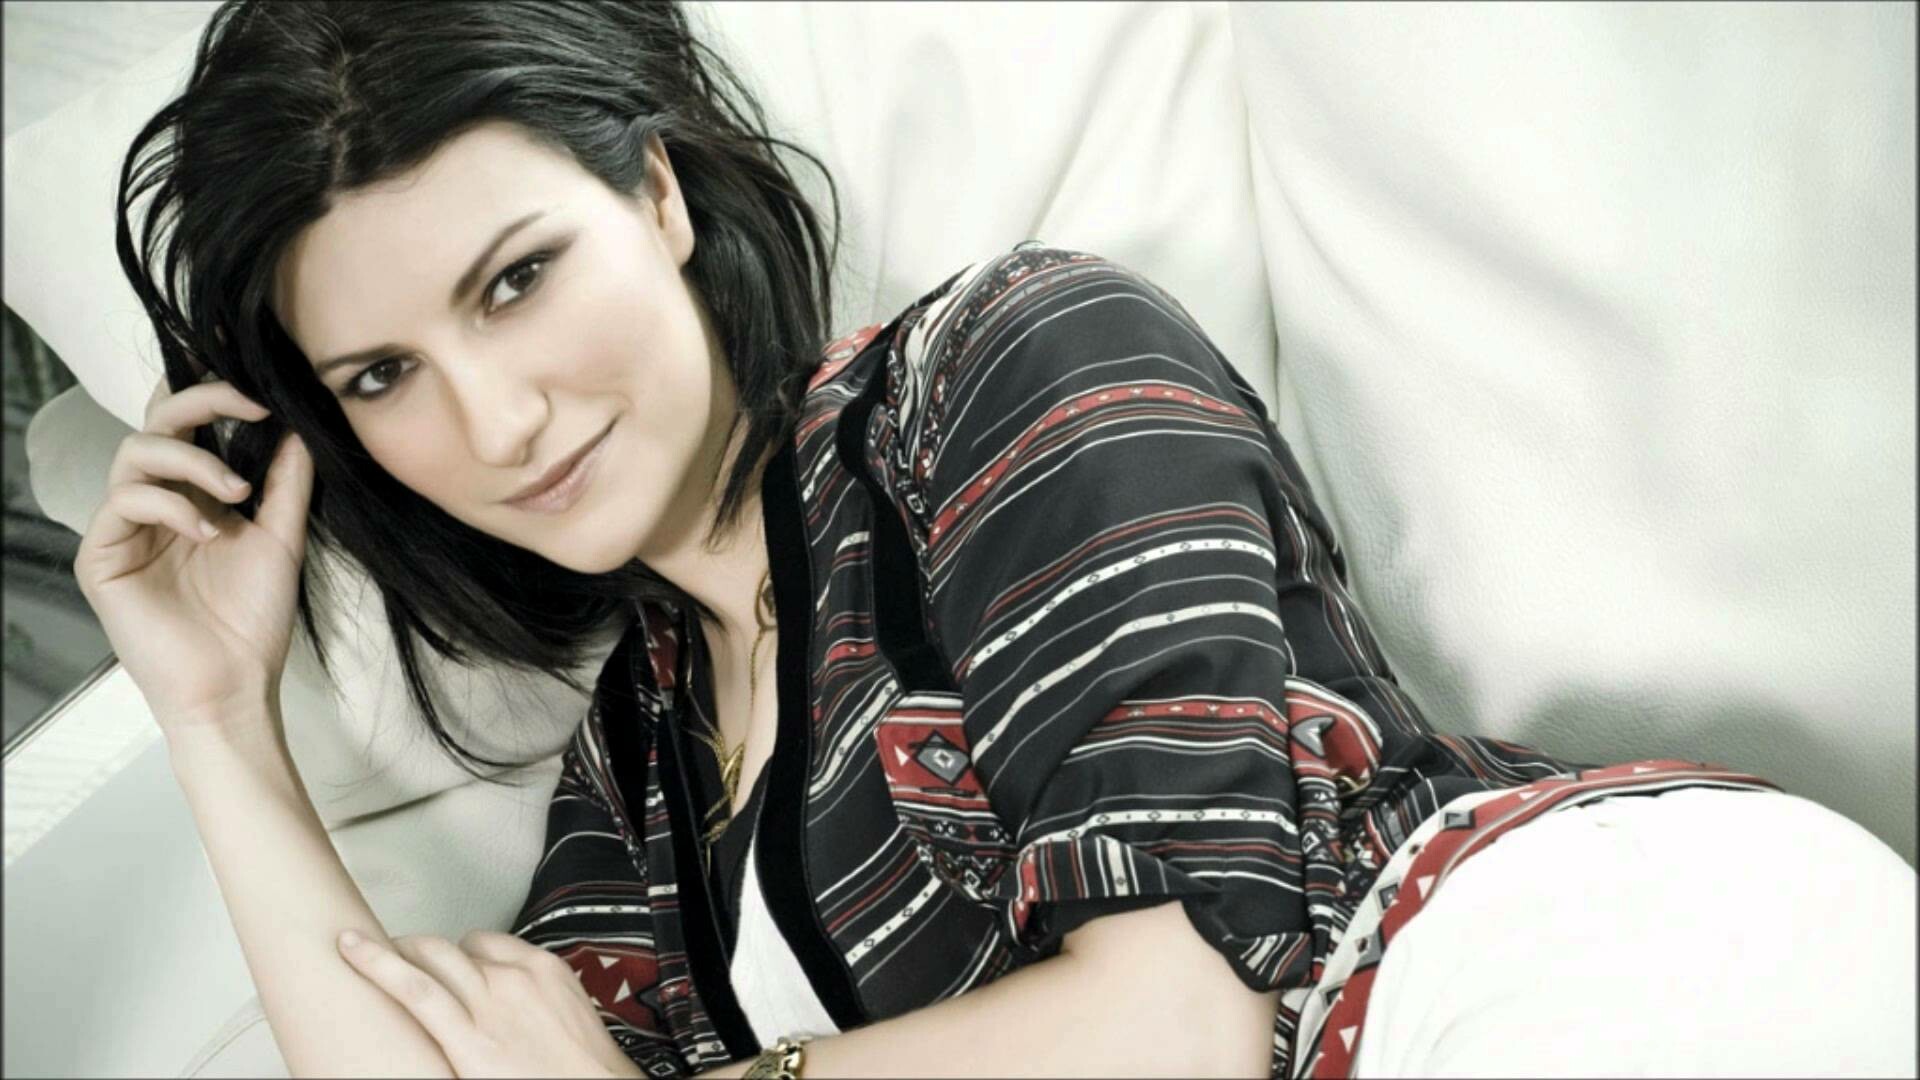 Laura Pausini: One of the most successful and admired Italian artists around the world. 1920x1080 Full HD Wallpaper.